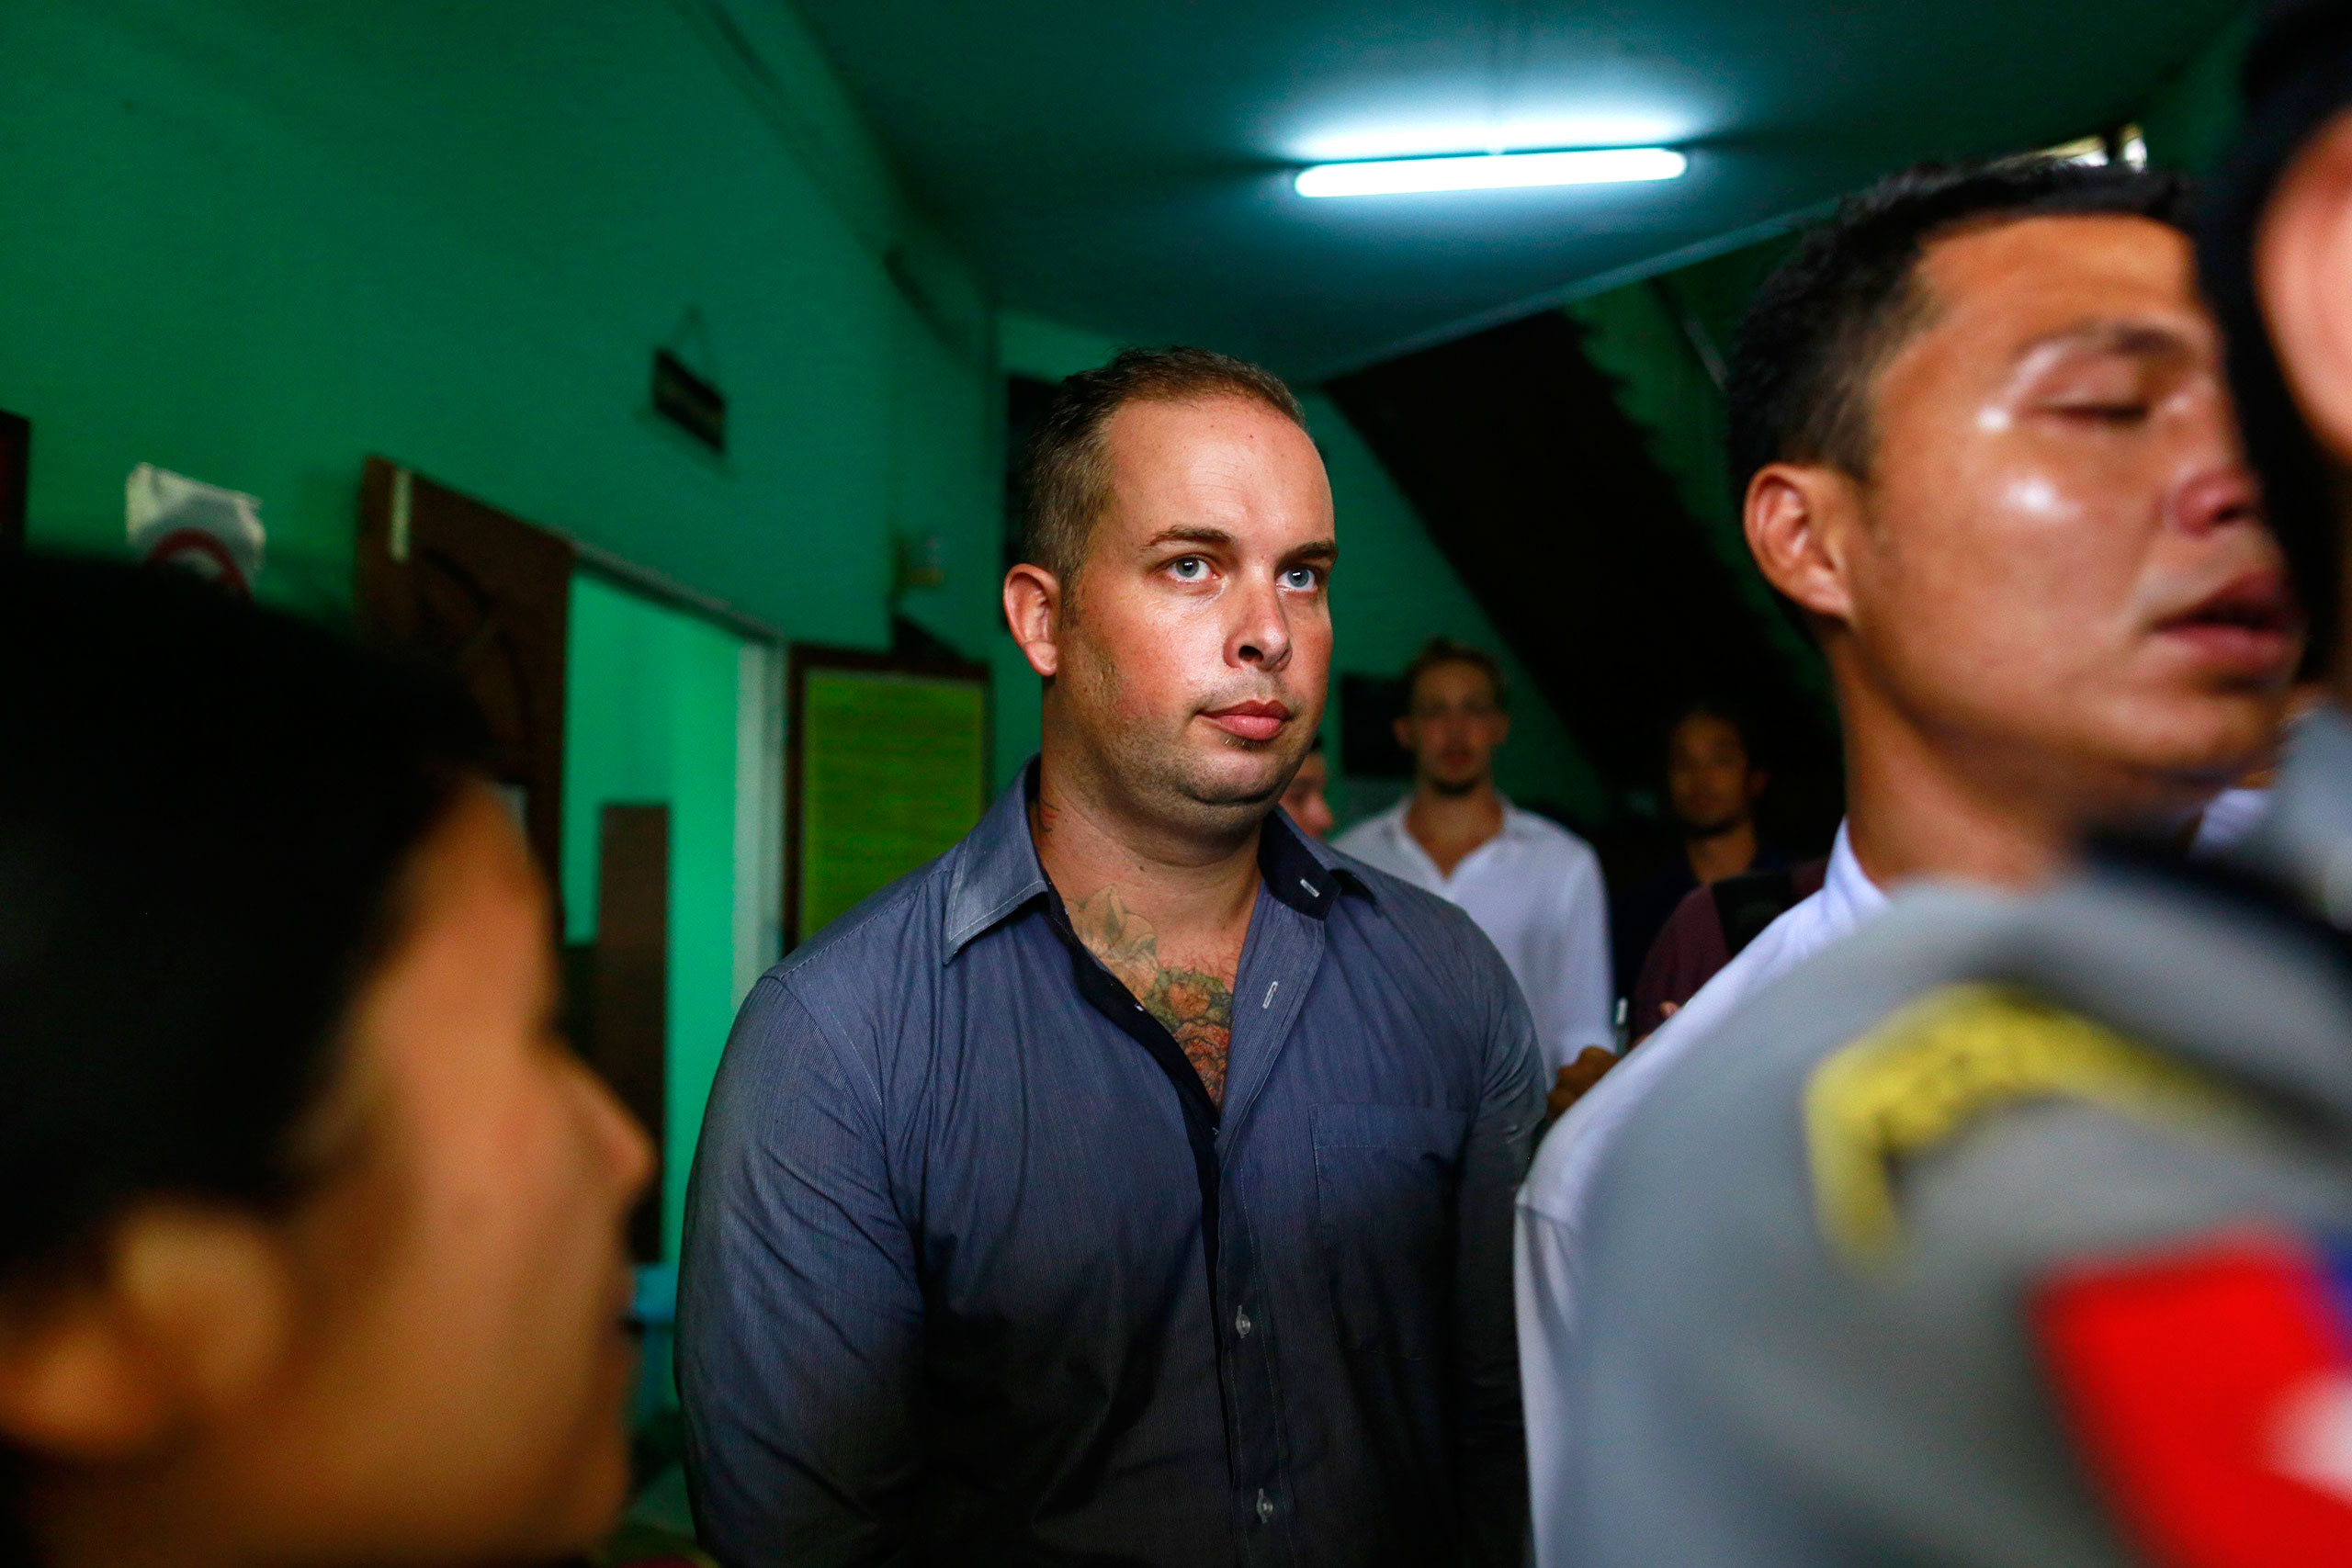 Phil Blackwood, a bar manager from New Zealand, comes out of court after being sentenced to two and half years in prison, at Bahan township court in Yangon on March 17, 2015. (Soe Zeya Tun—Reuters)